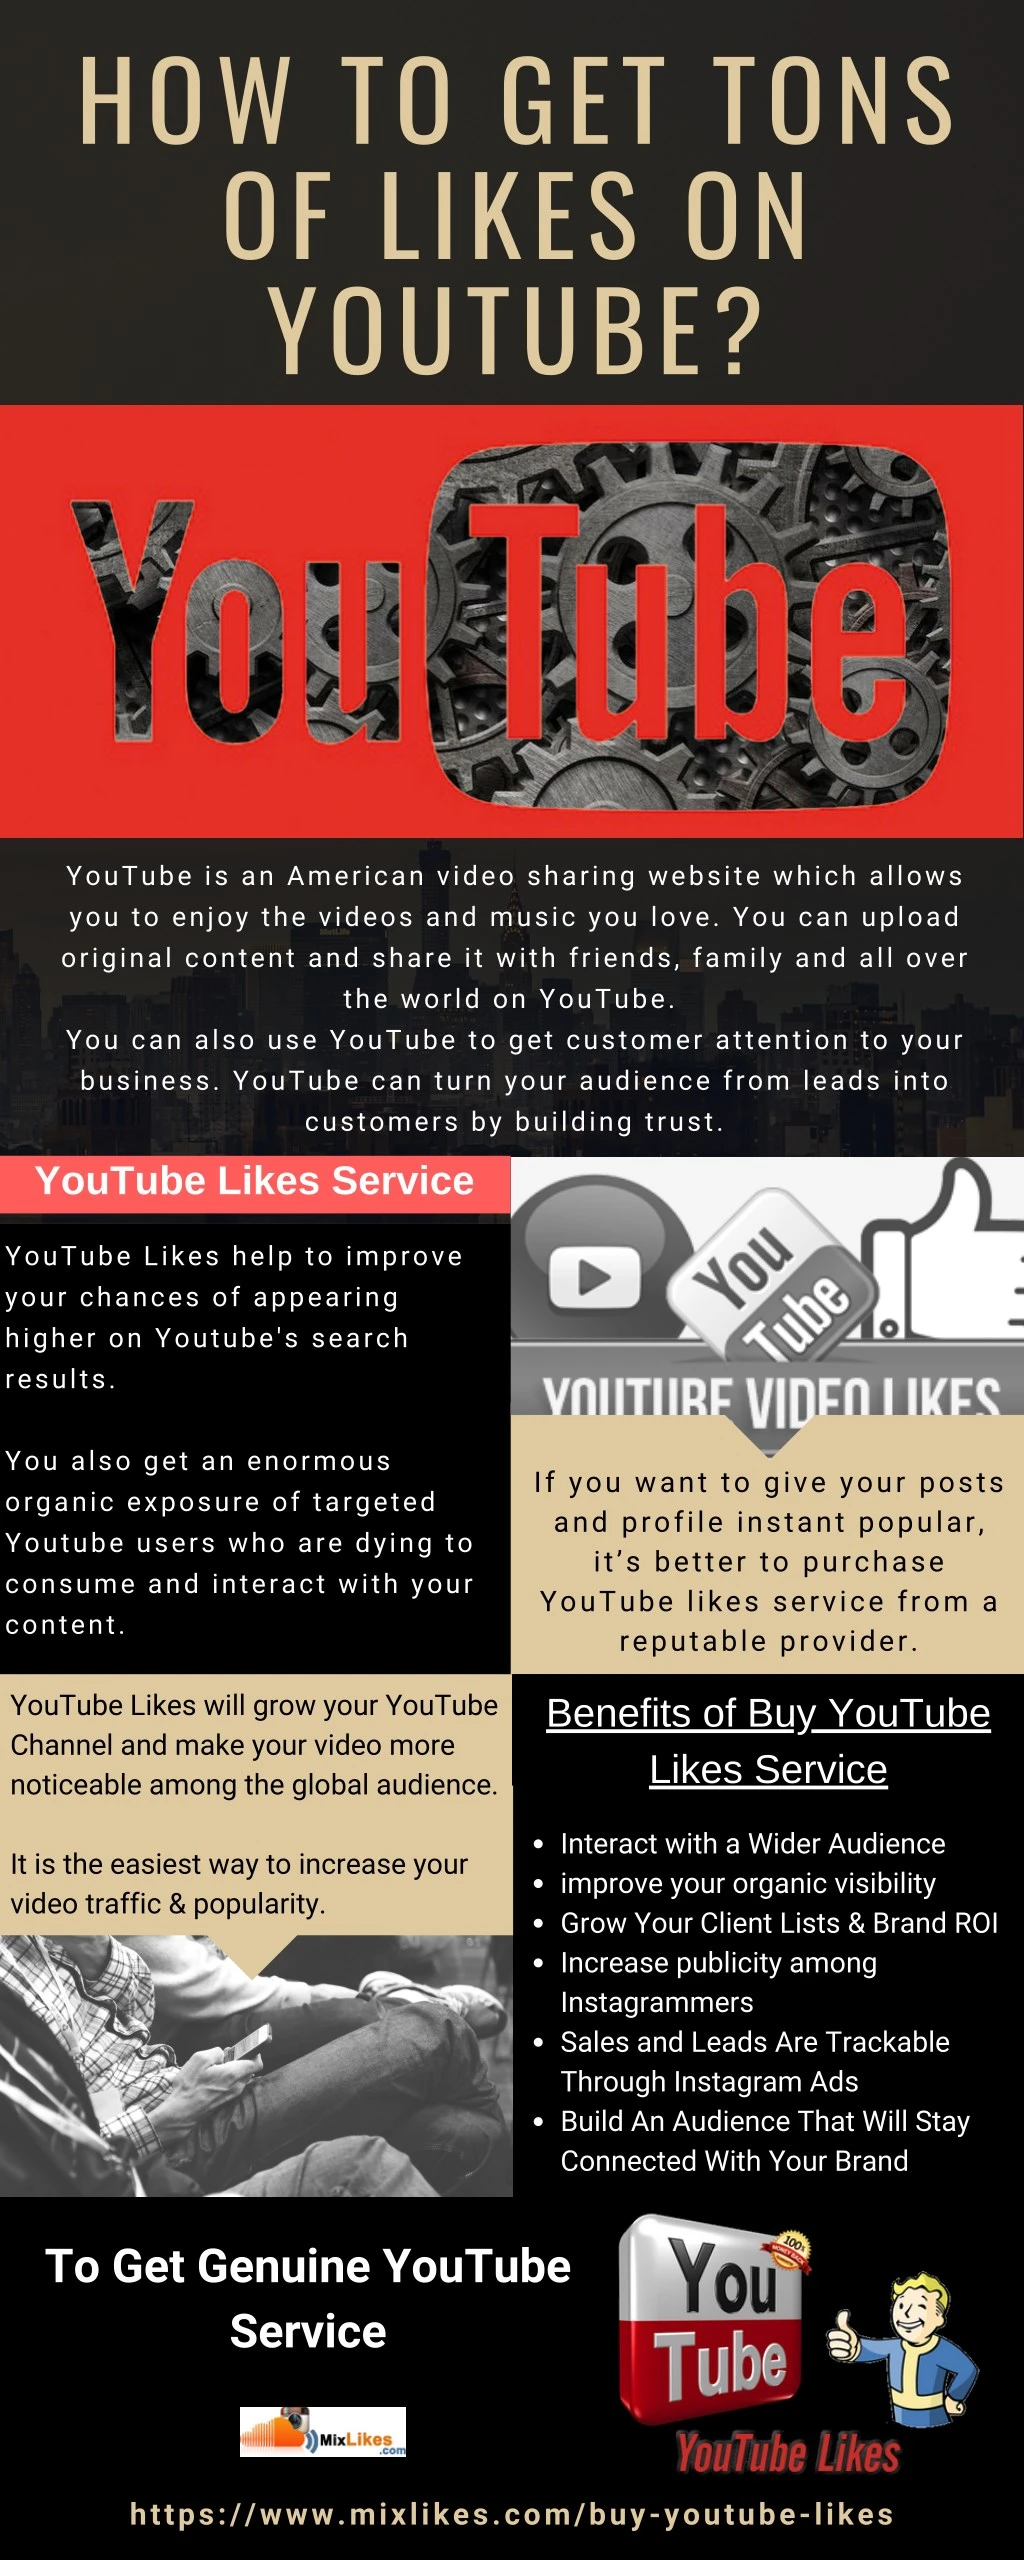 how to get tons of likes on youtube